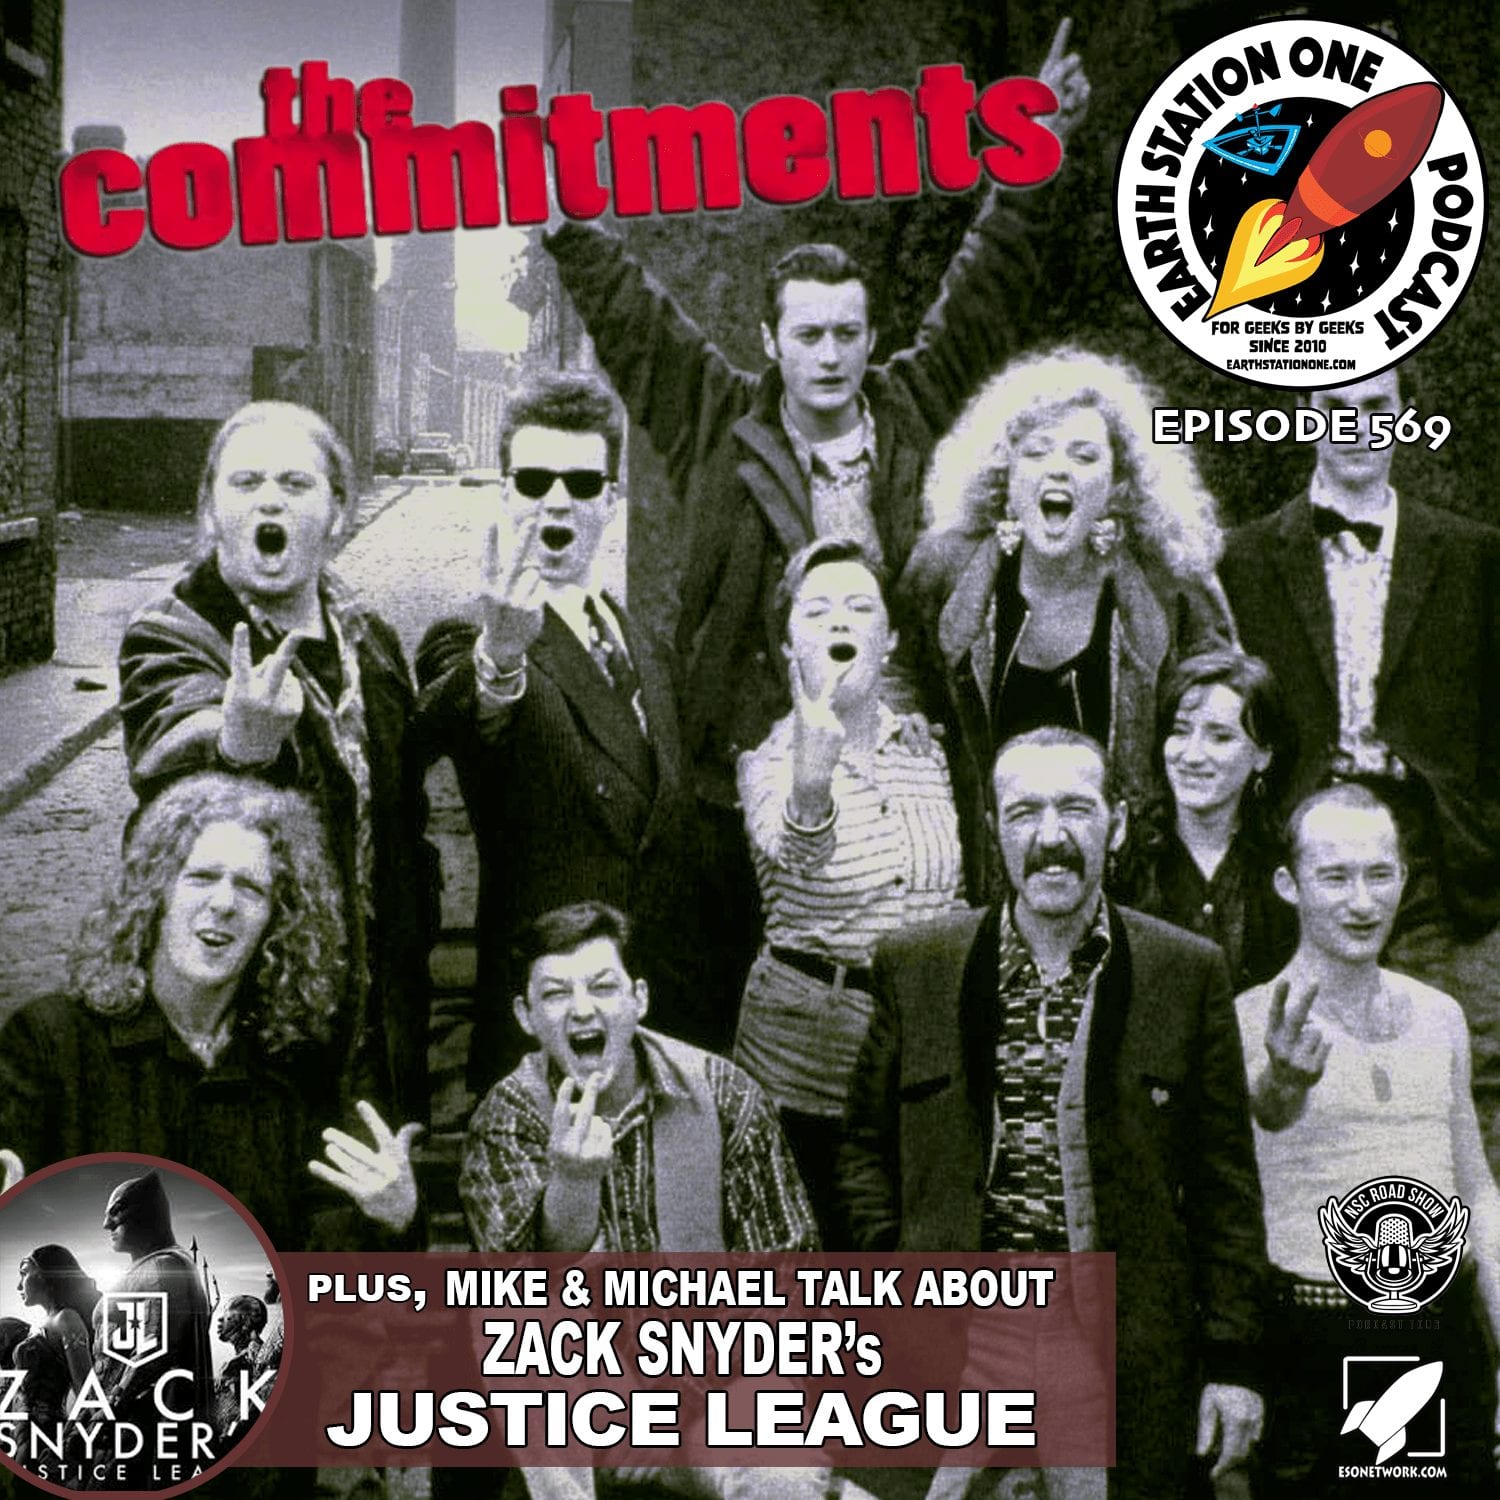 The Earth Station One Podcast - The 30th Anniversary of the Commitments